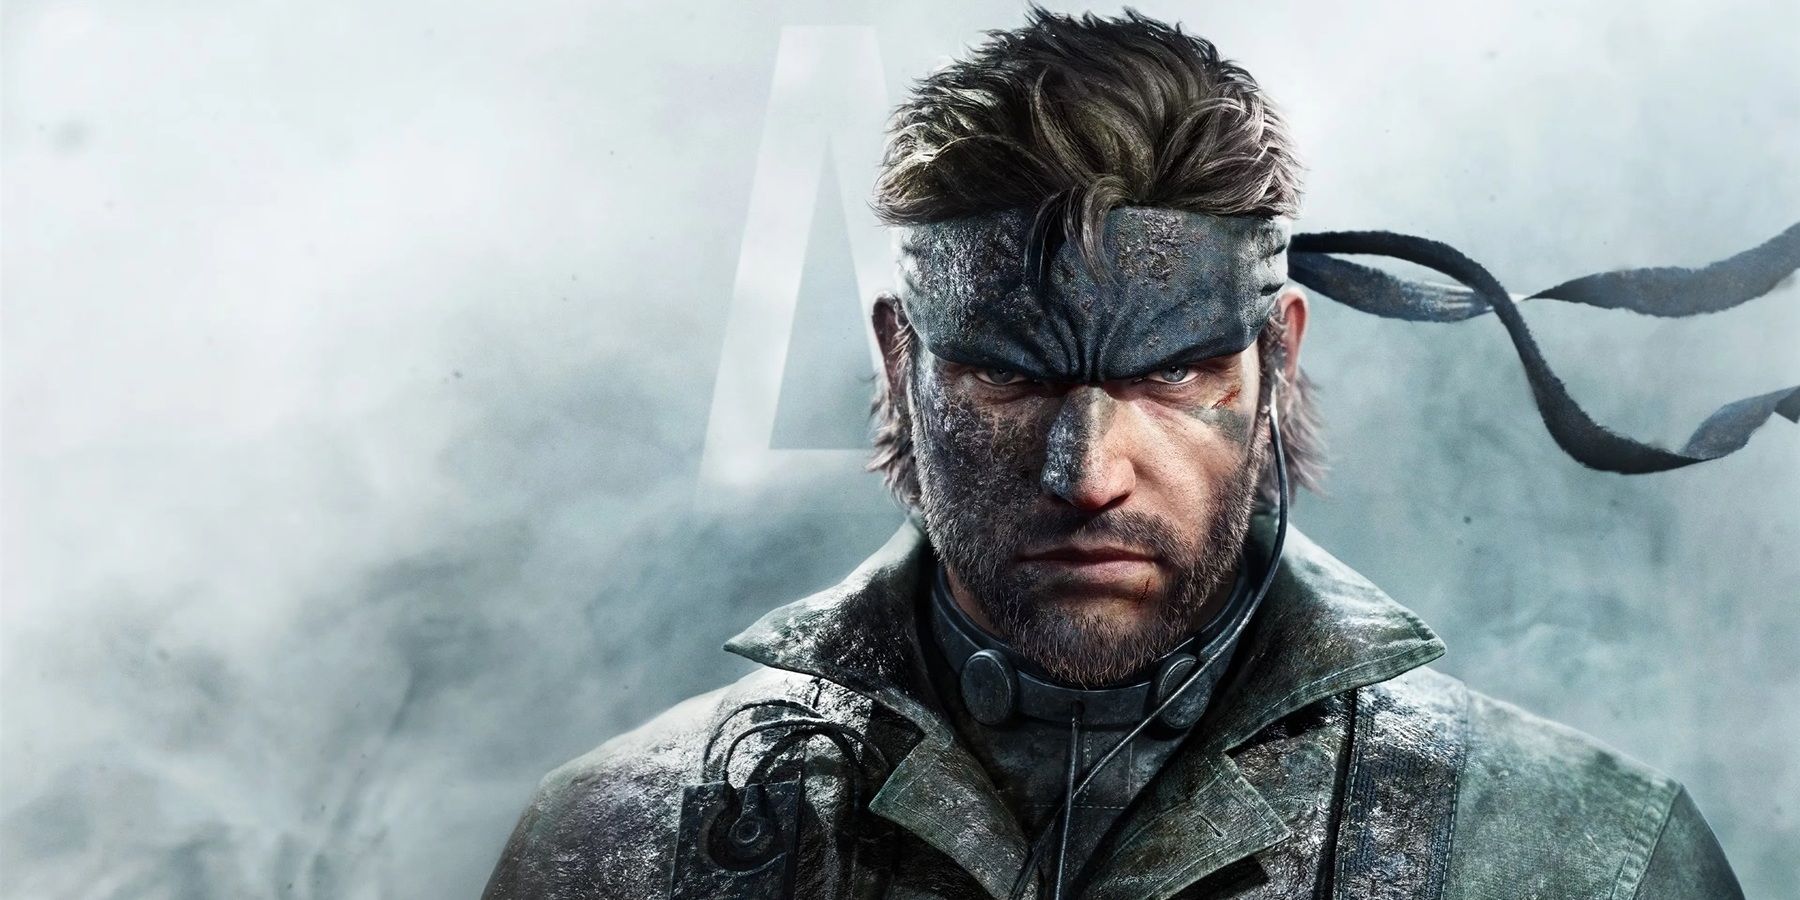 metal-gear-solid-3-snake-eater-remake-in-engine-footage-looks-absolutely-stunning